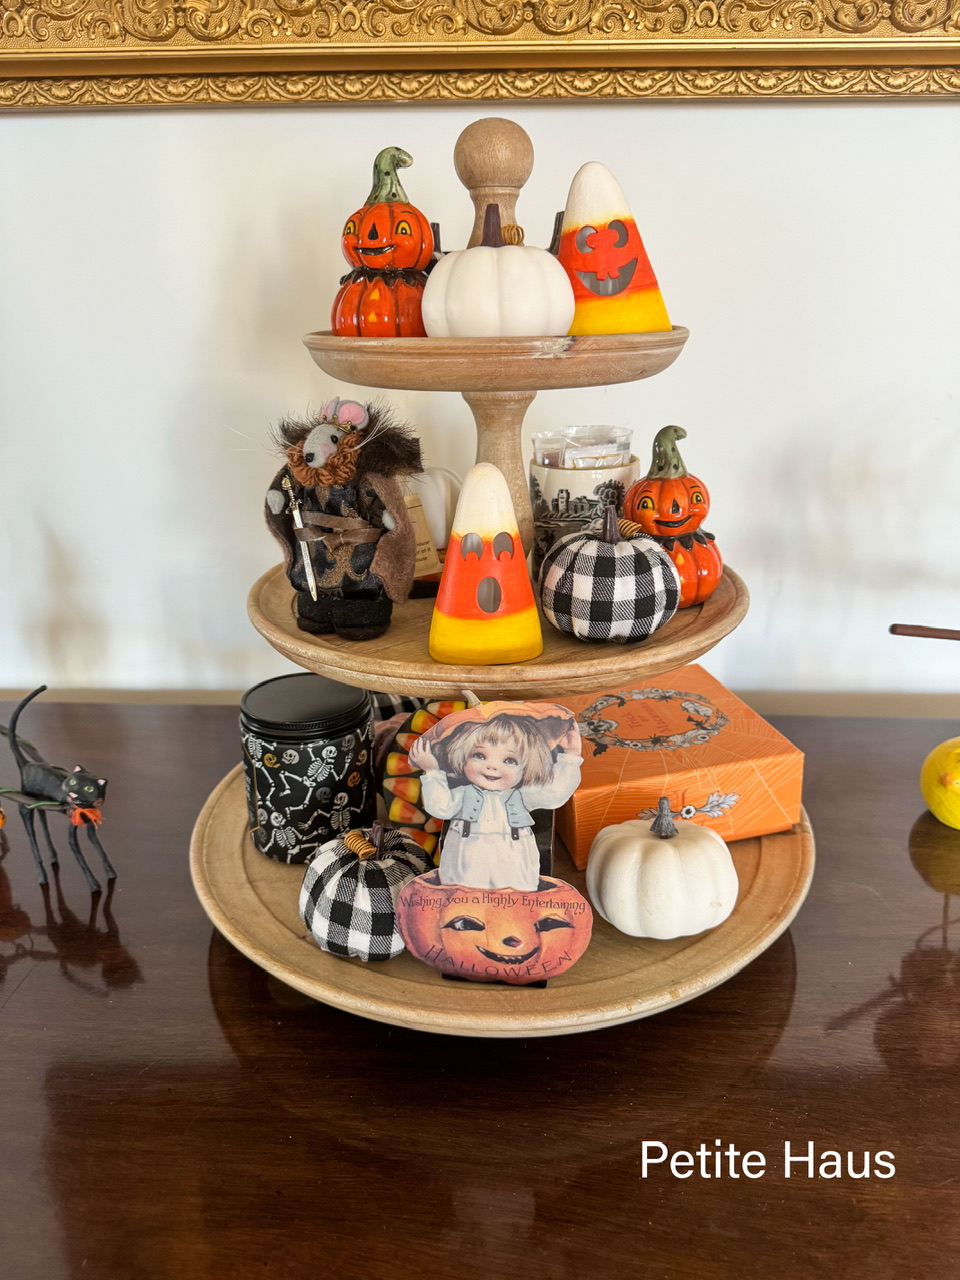 Halloween Gnome With Striped Hat for Tiered Tray Decor, Gothic